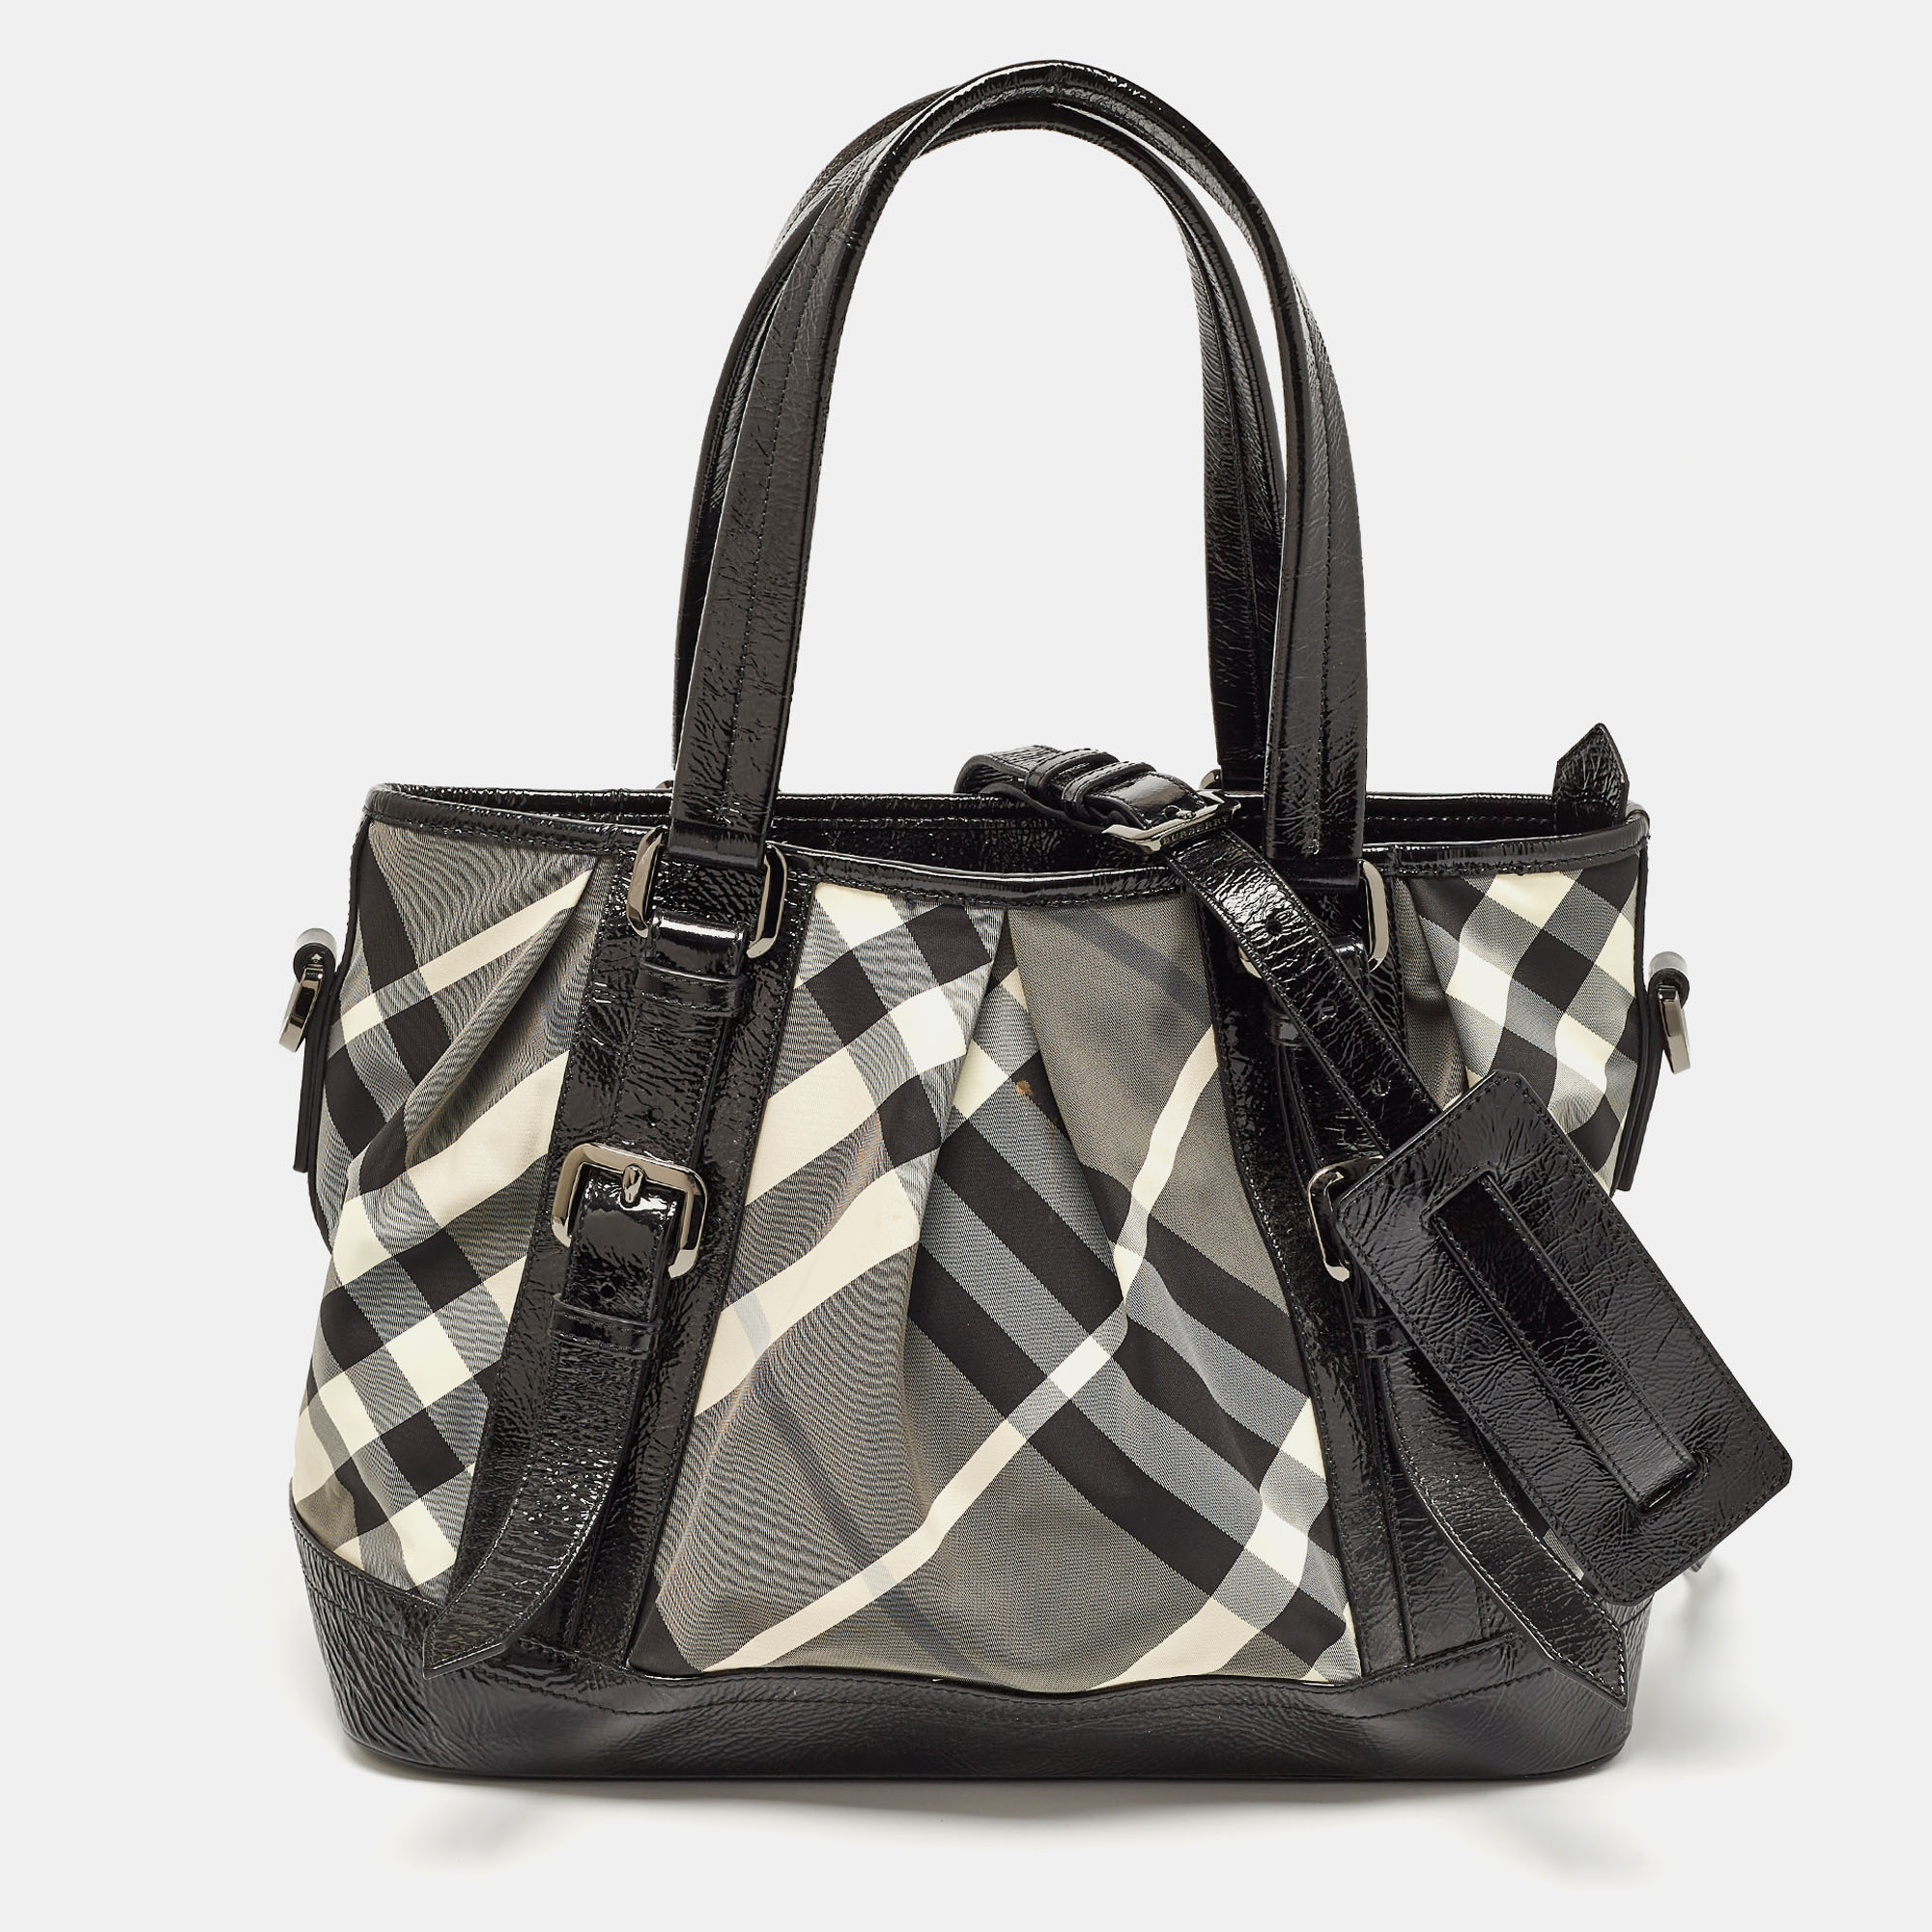 This Burberry tote is an example of the brands fine designs that are skillfully crafted to project a classic charm. It is a functional creation with an elevating appeal.